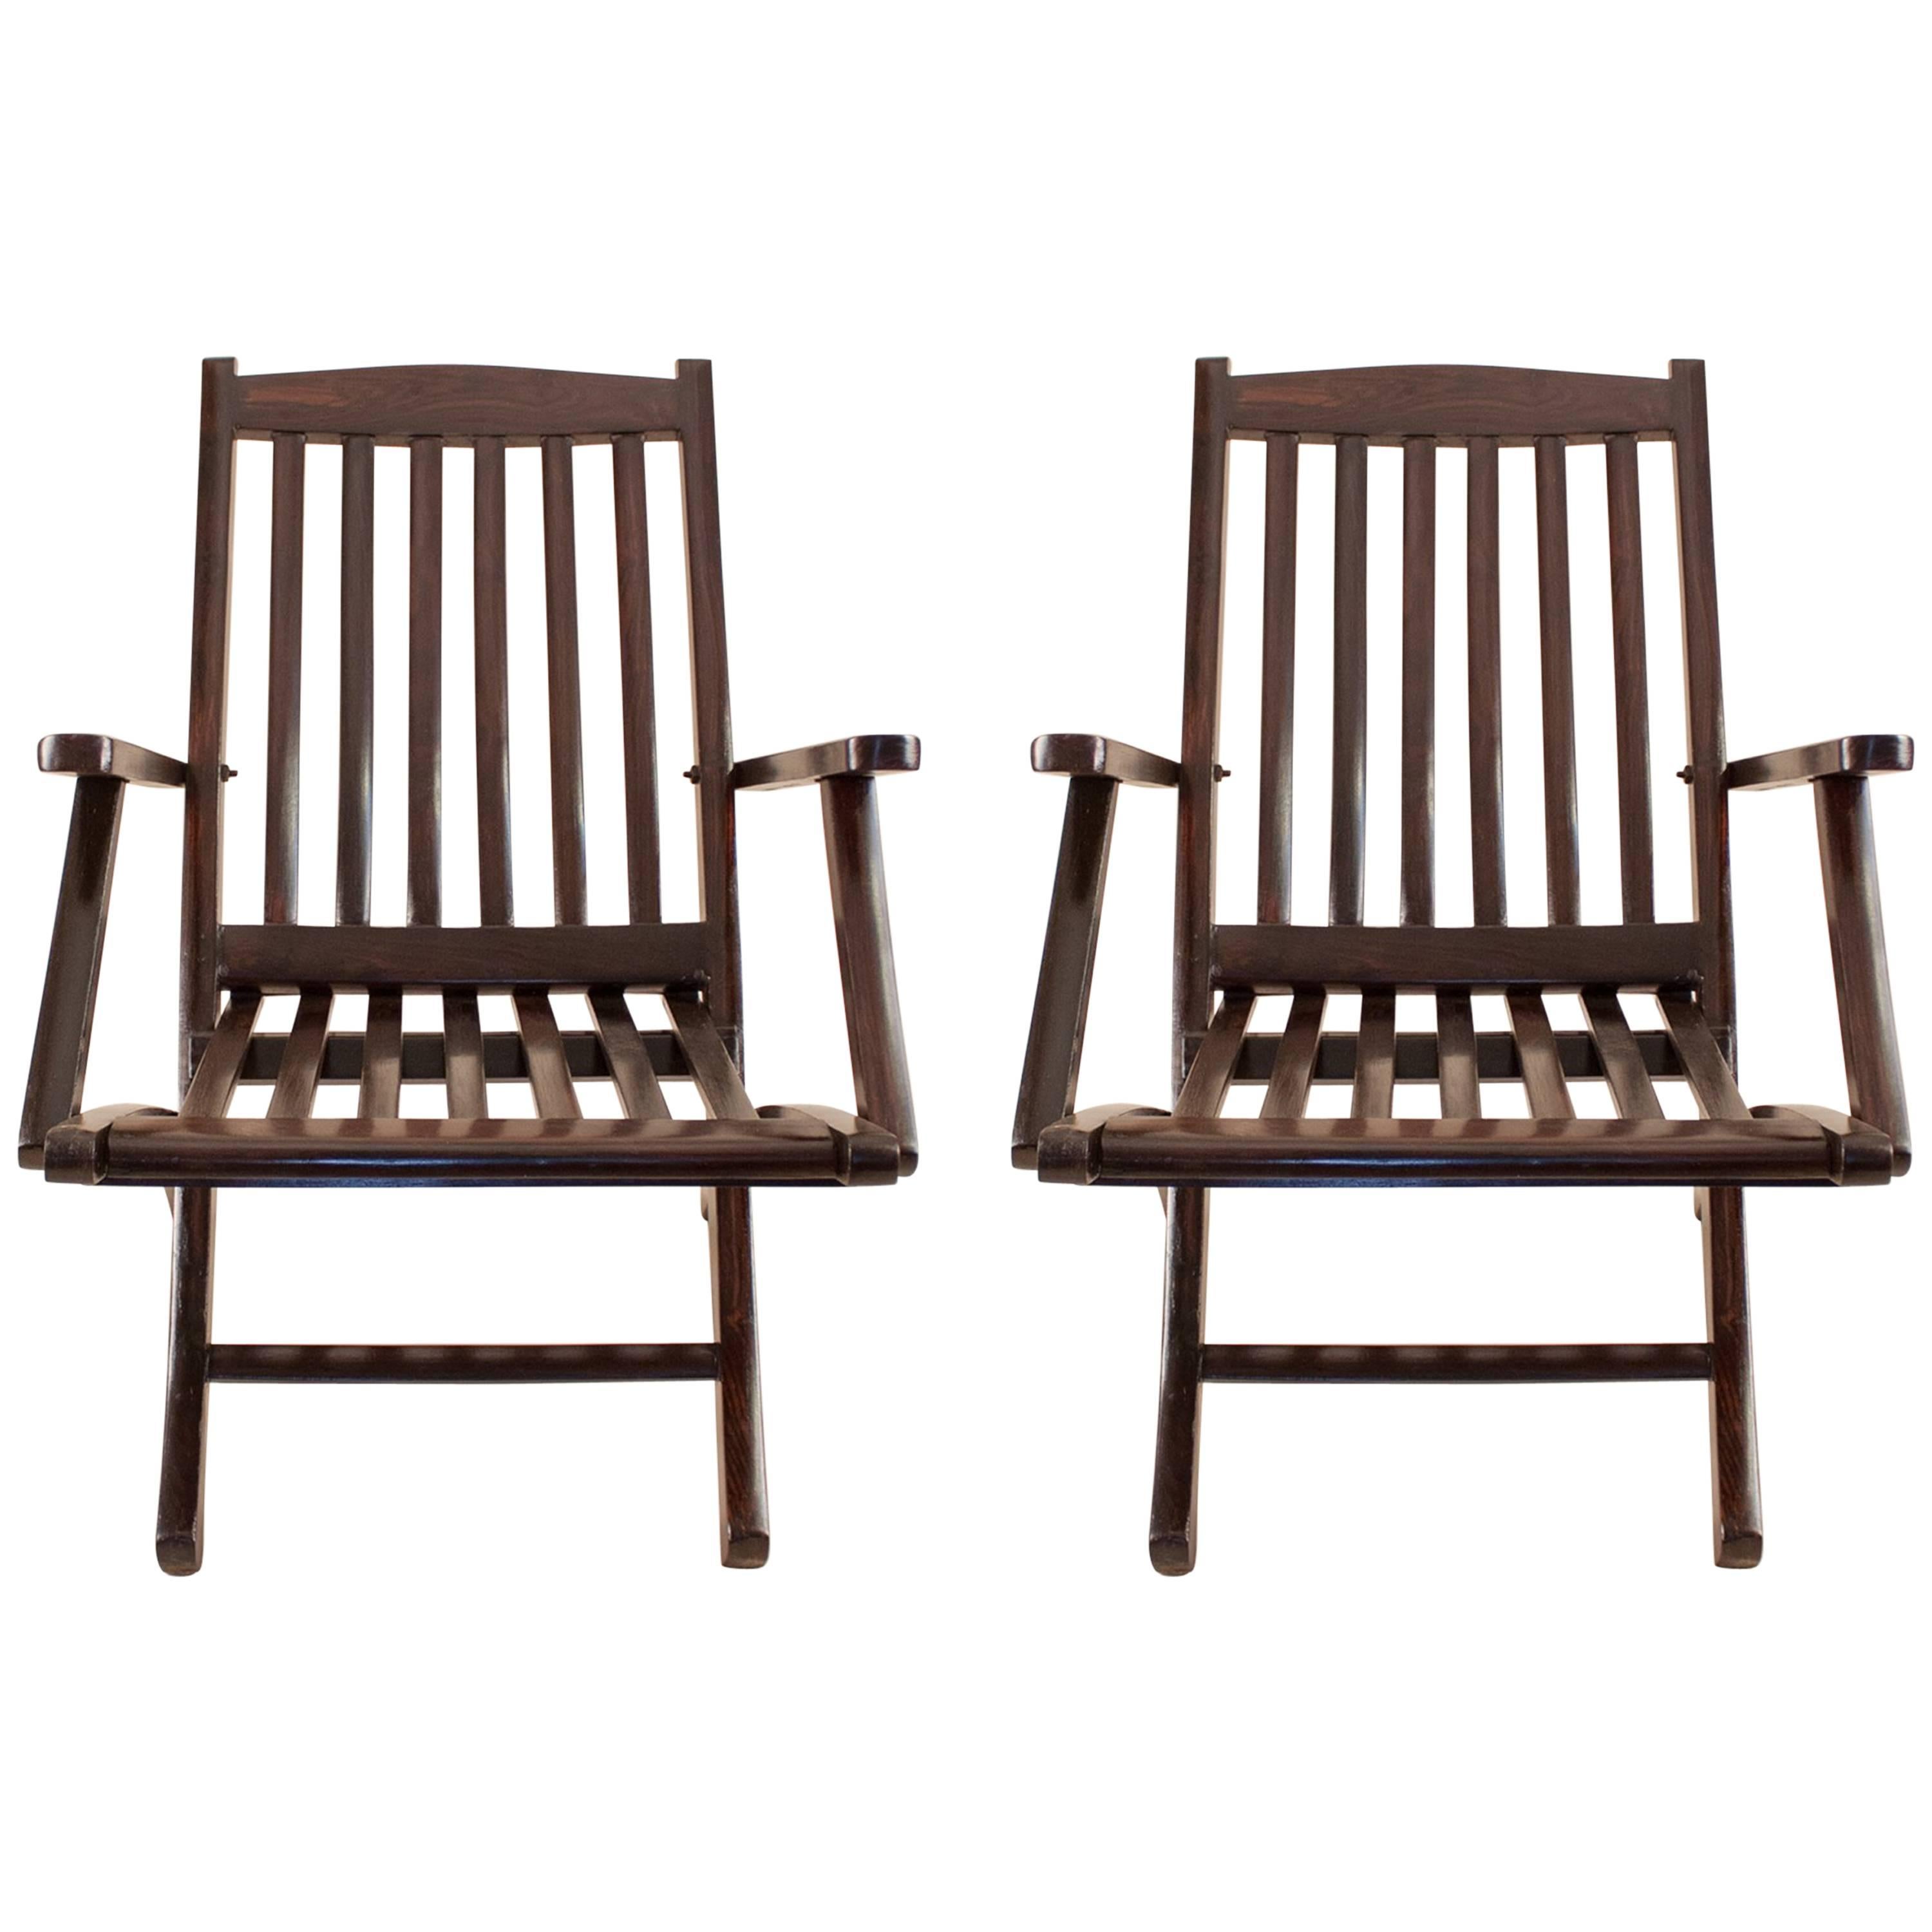 Pair of British Rosewood Folding Steamer Deck Chairs